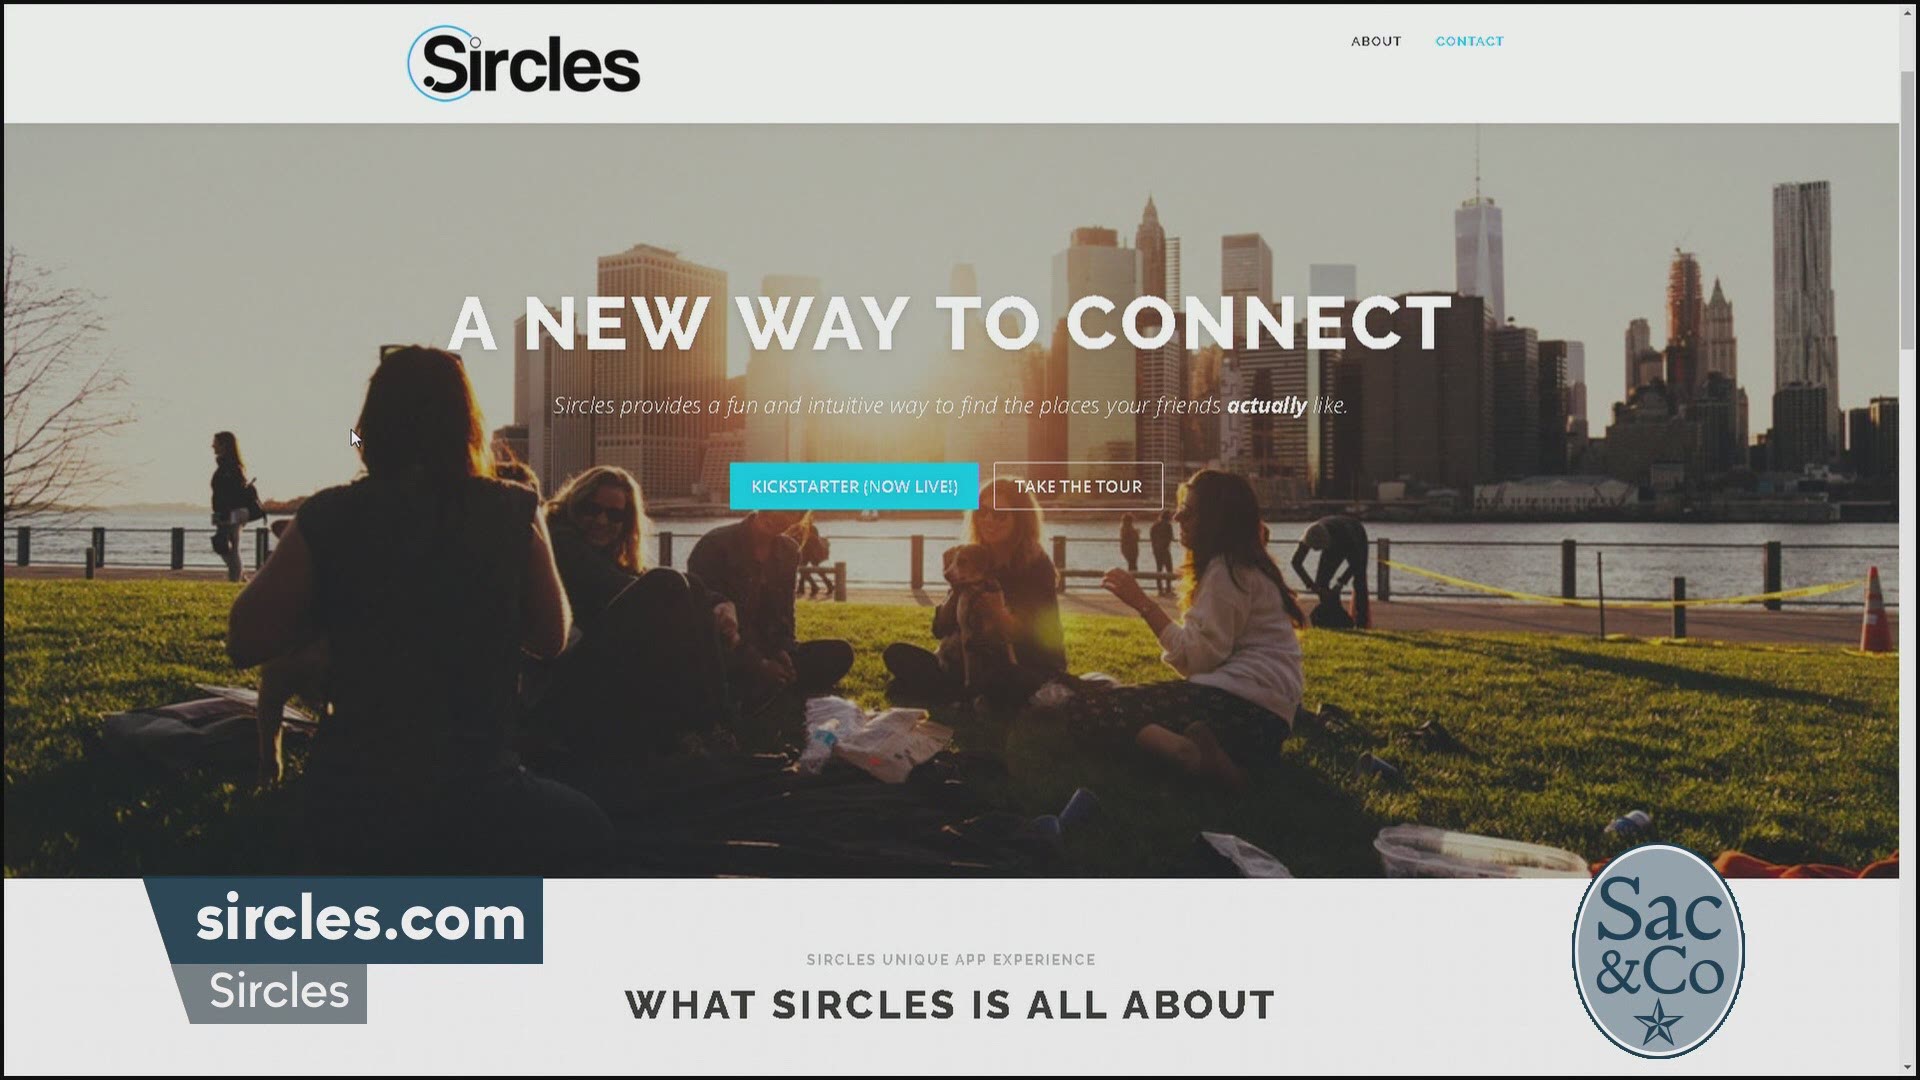 Find out how you can be a part of the Sircles community! The following is a paid segment sponsored by Sircles.